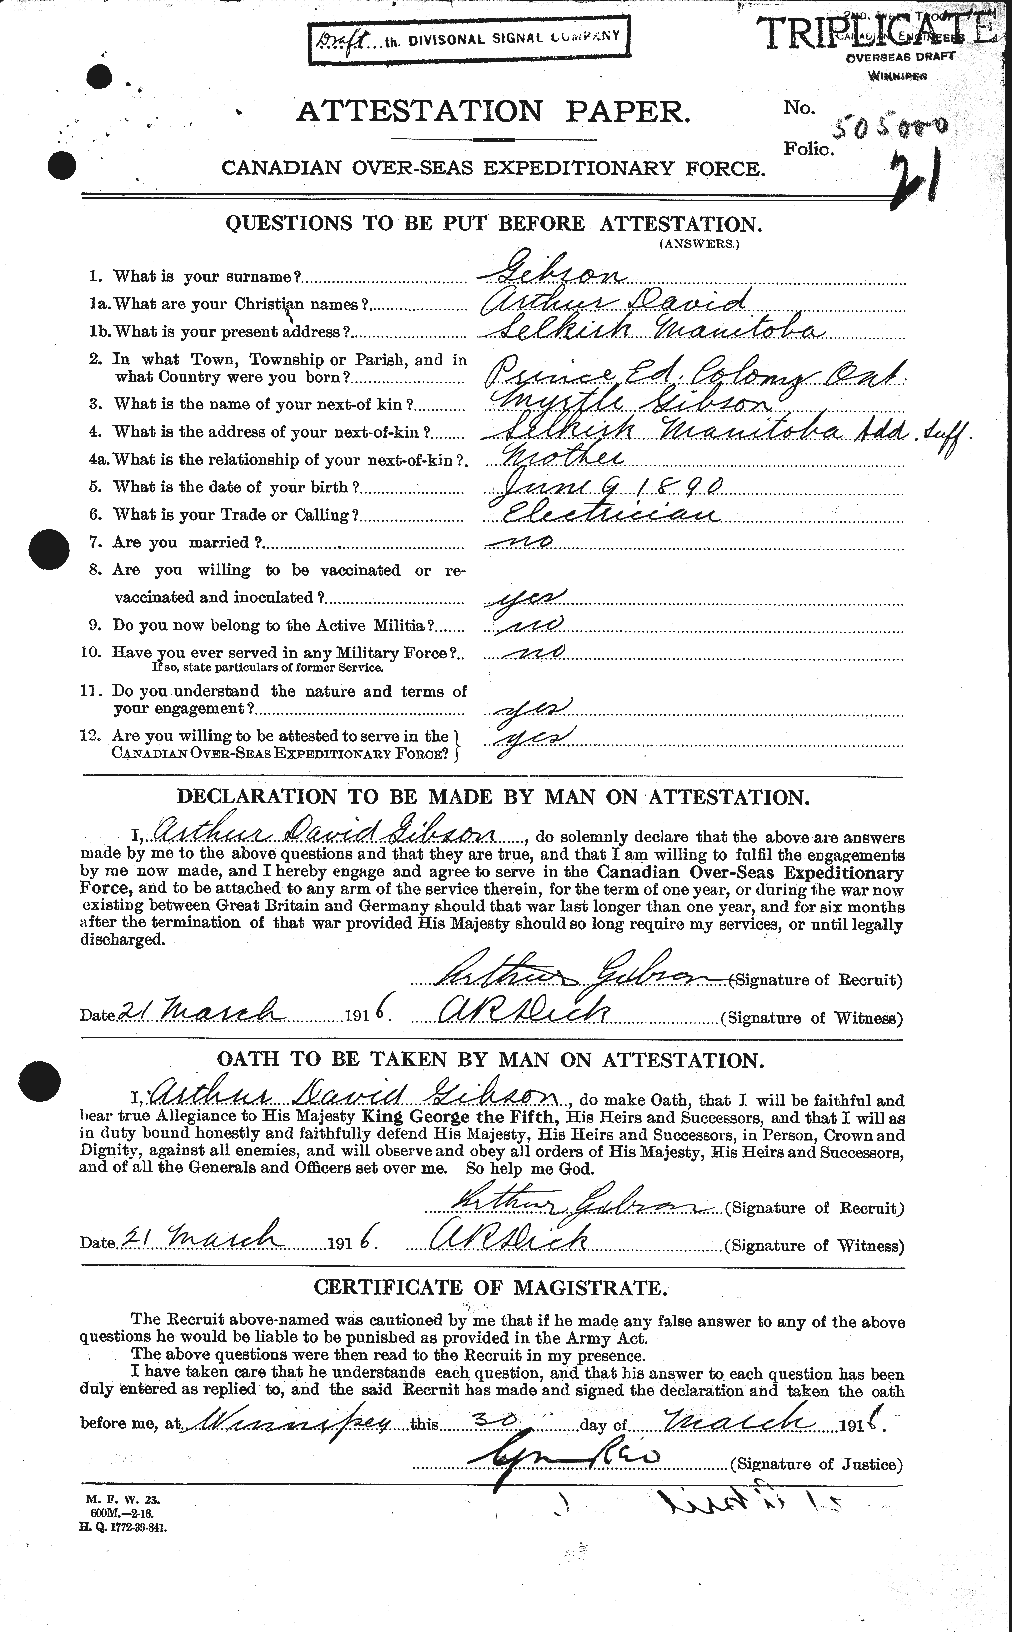 Personnel Records of the First World War - CEF 347180a